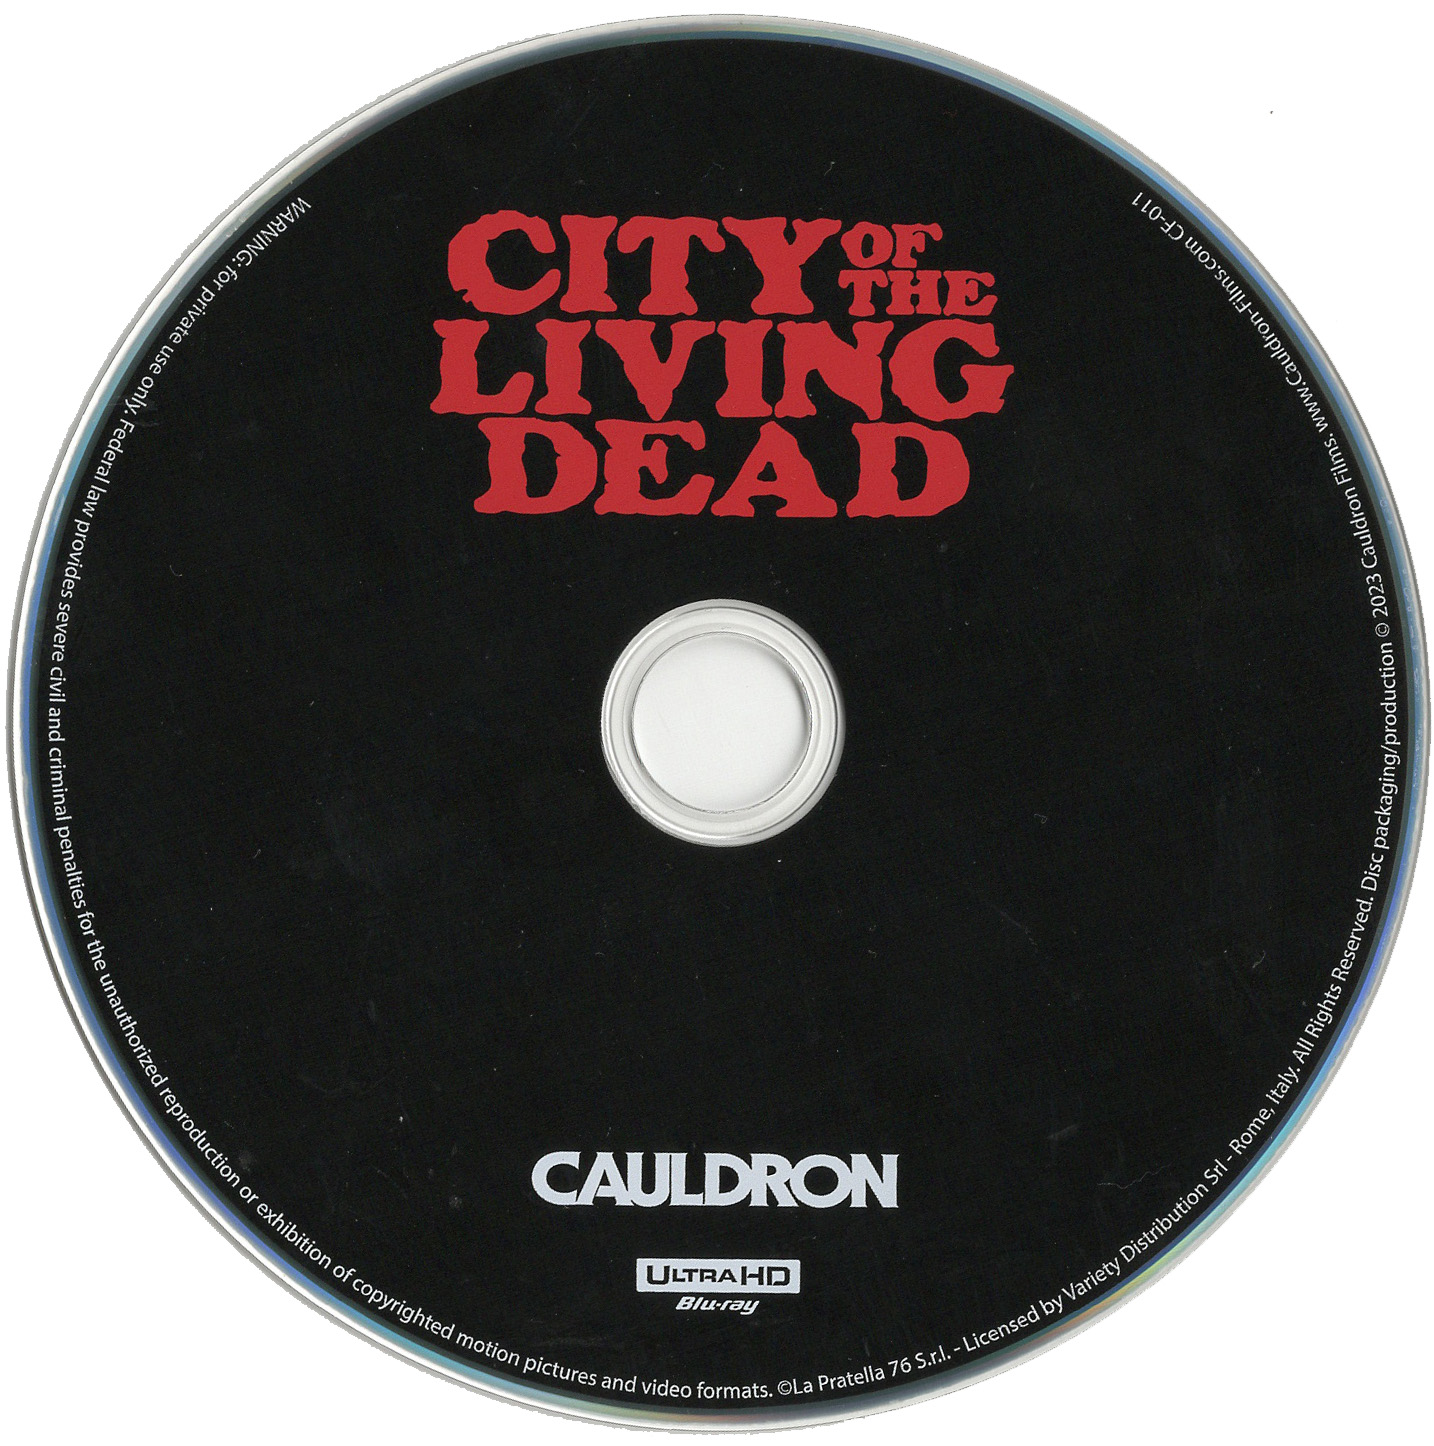 Picked up City Of The Living Dead after so many spectacular reviews. Nice  to see Cauldron enter the 4K UHD game : r/boutiquebluray